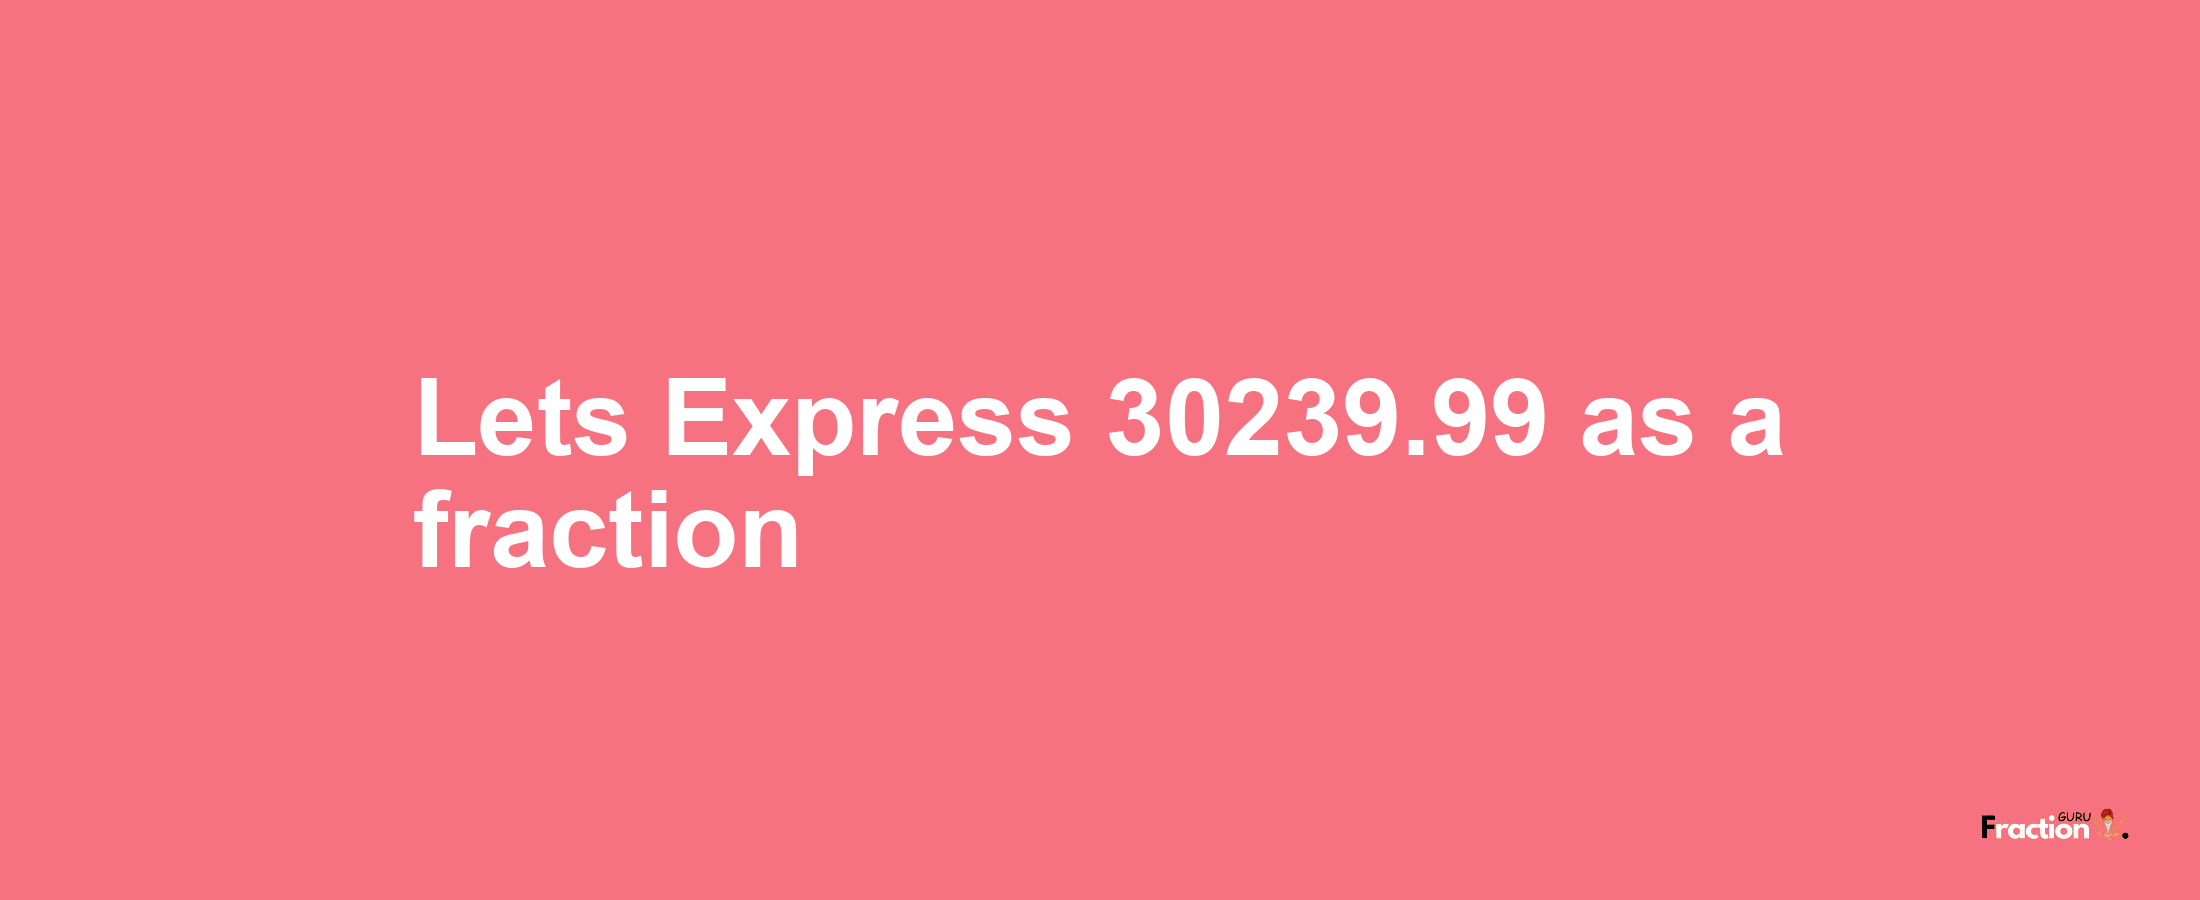 Lets Express 30239.99 as afraction